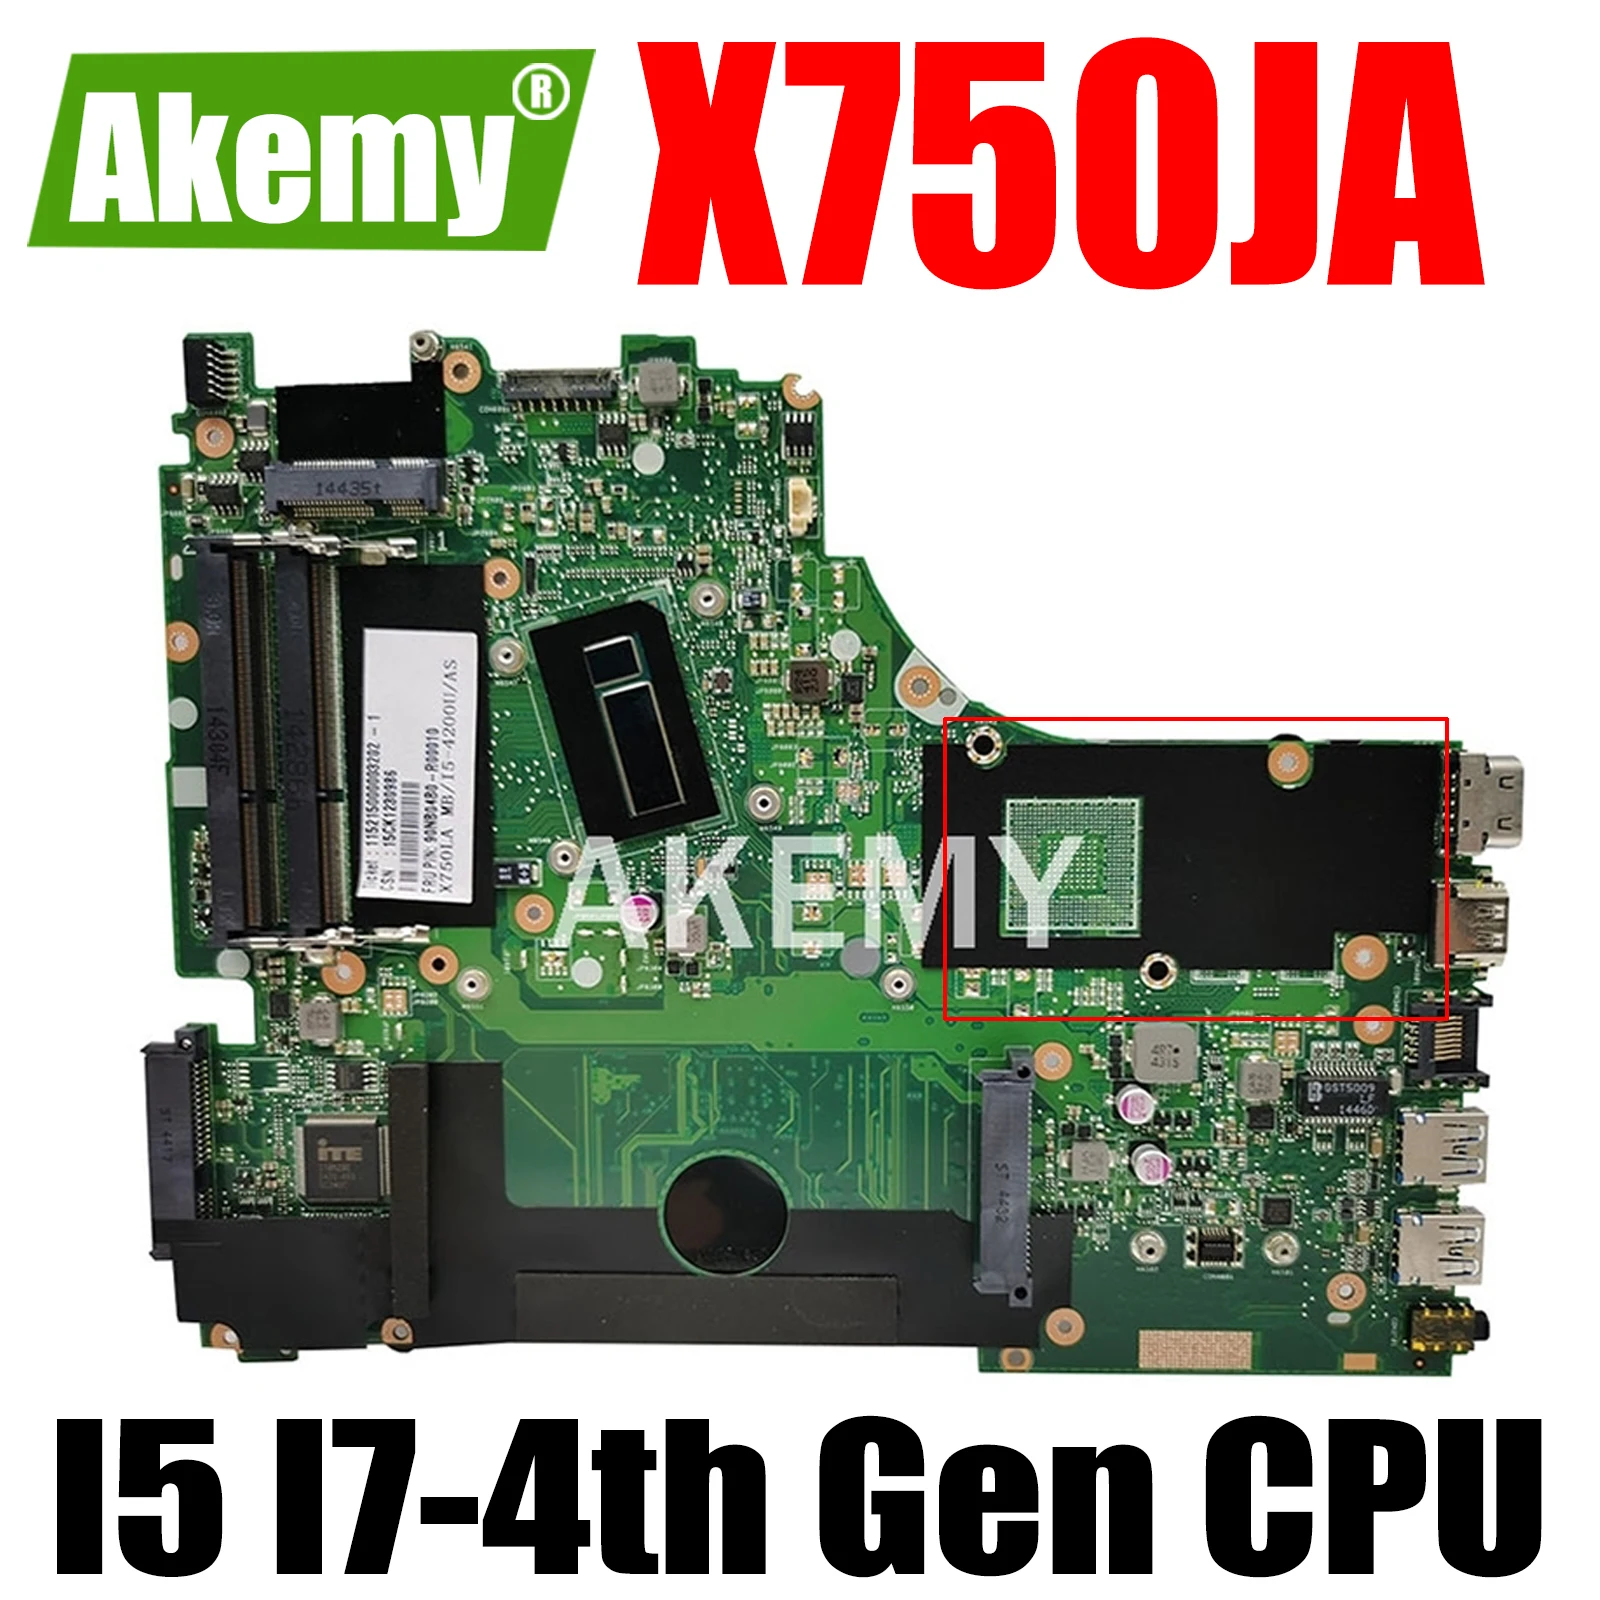 

X750JA Motherboard with I5-4th Gen I7-4th Gen CPU for ASUS A750J K750J K750JB X750JB X750JN X750JA Laptop Motherboard Mainboard